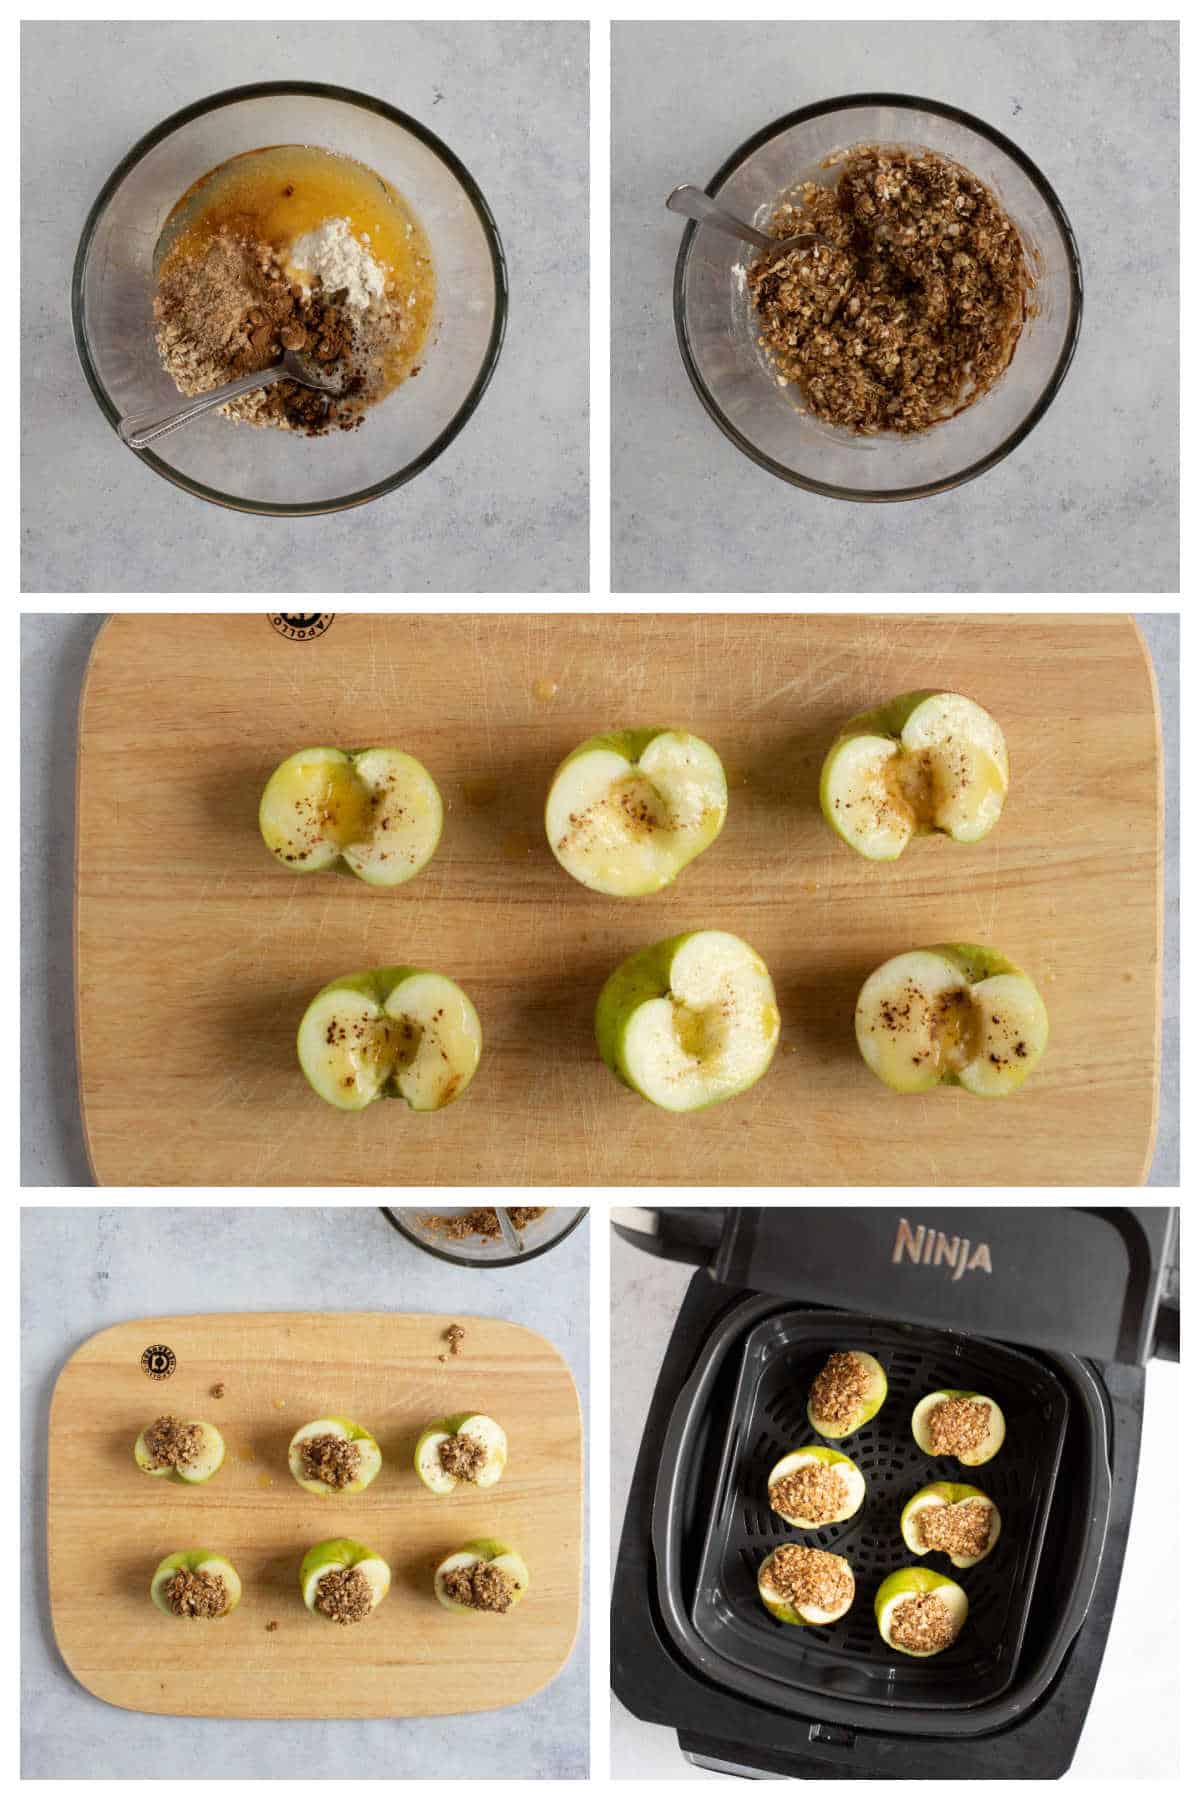 Step by step photo instructions for making baked apples in an air fryer.